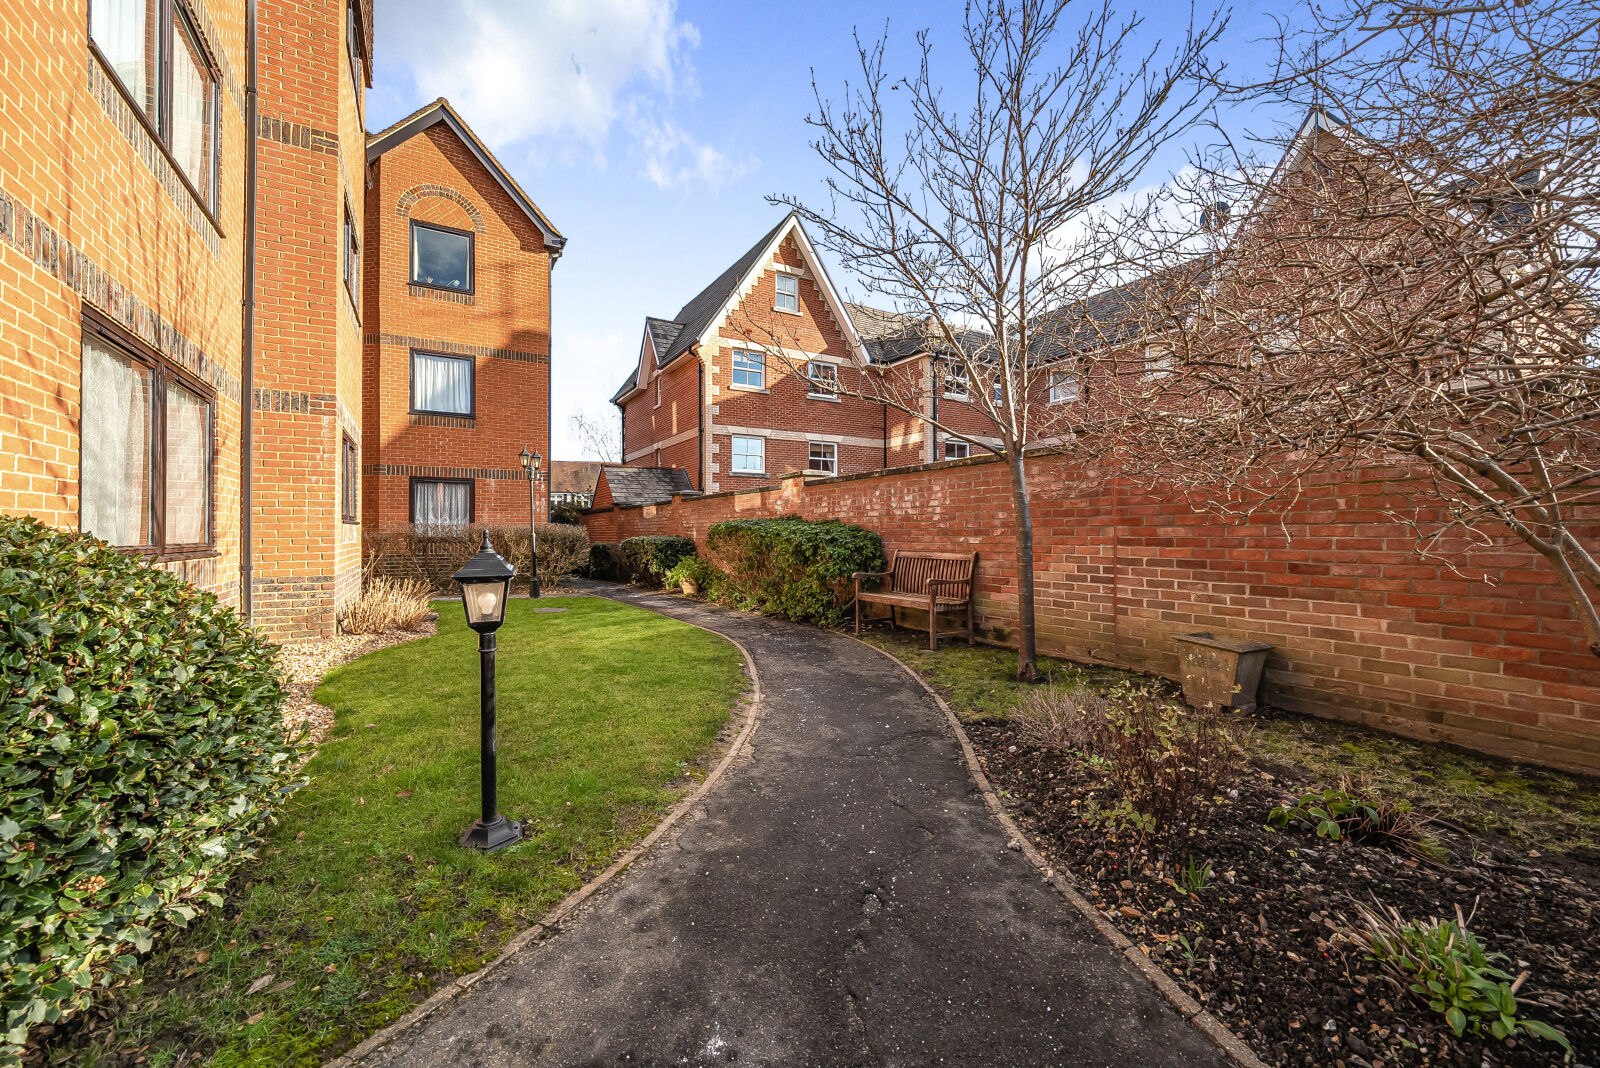 2 bedroom  flat for sale Victoria Court, Henley-on-Thames, RG9, main image